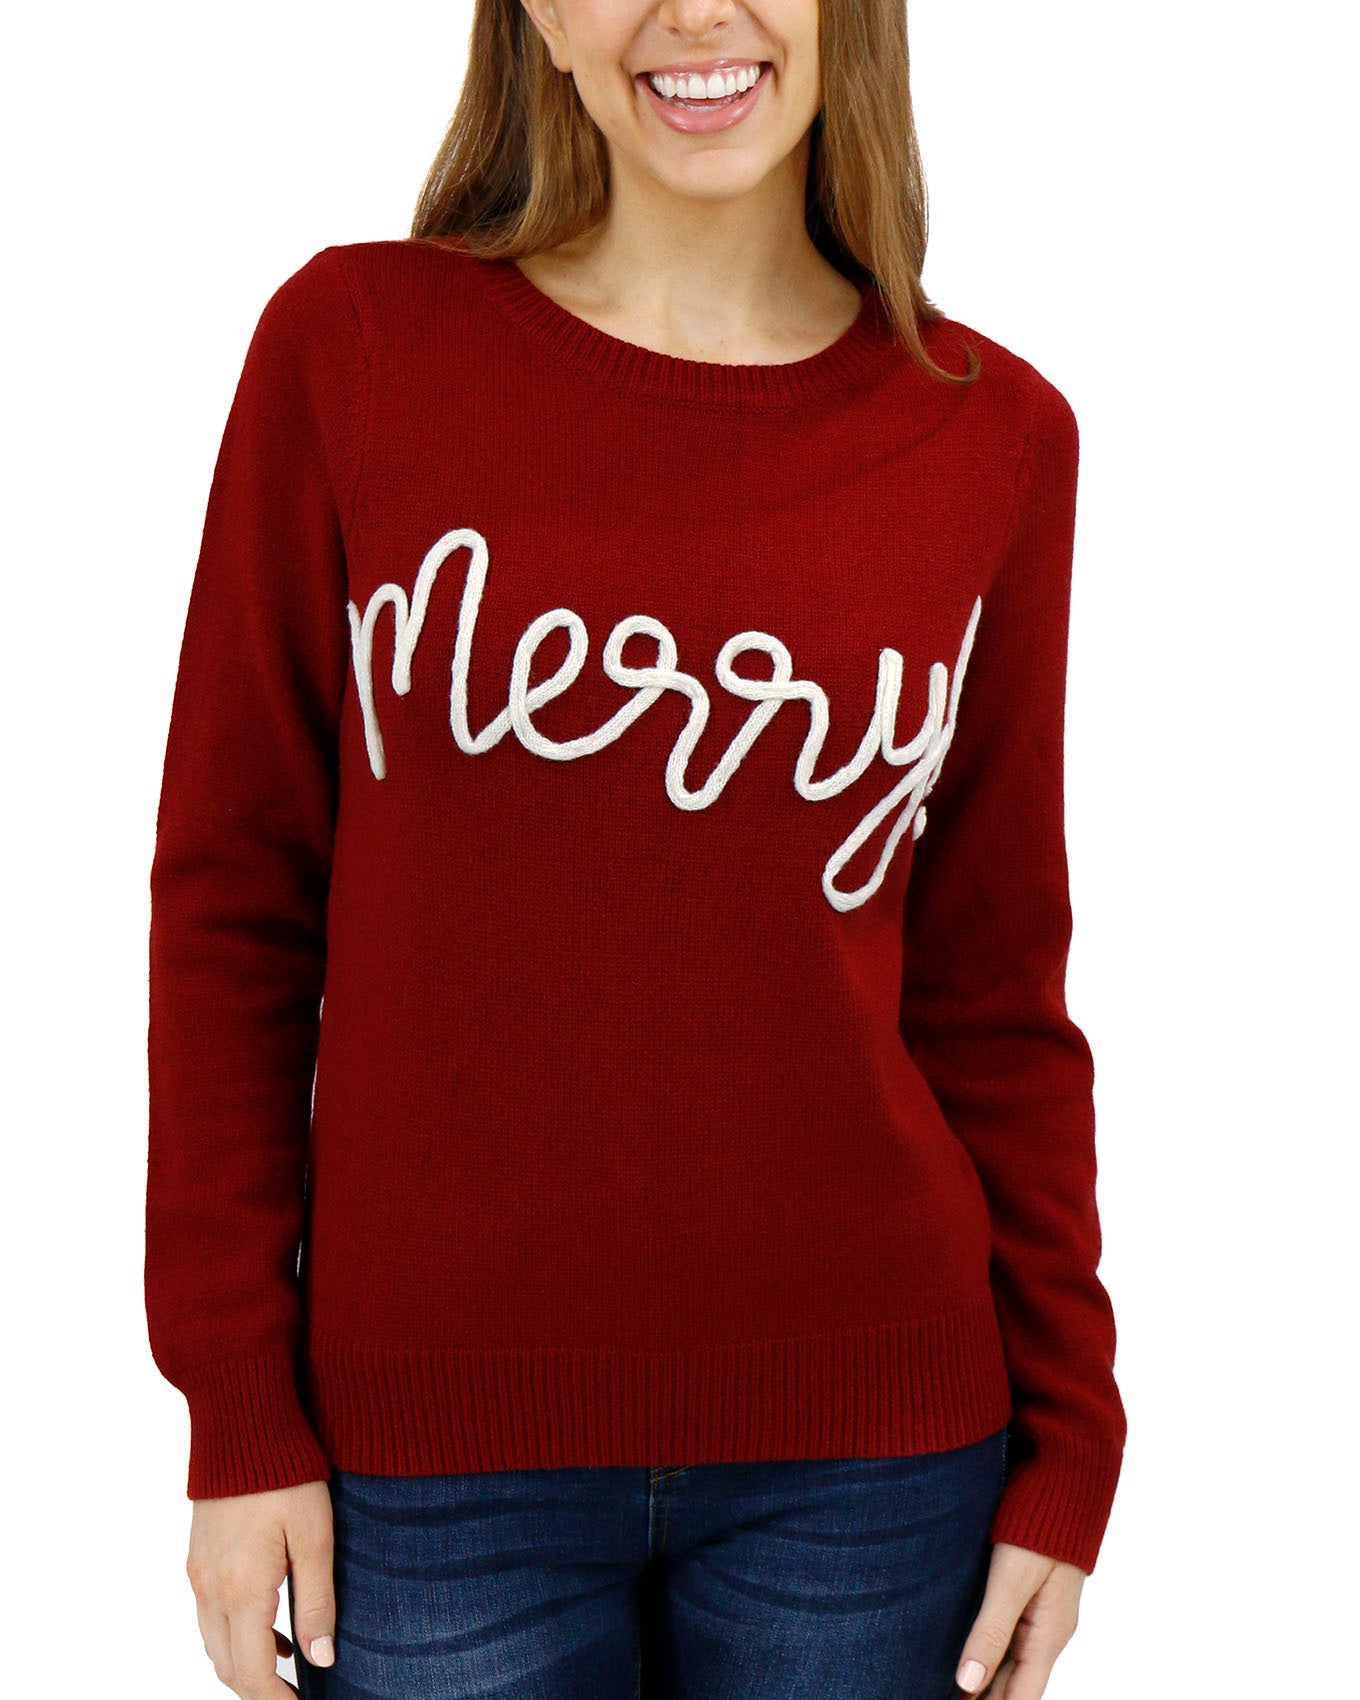 Front view stock shot of Merry Red Holiday Sweater